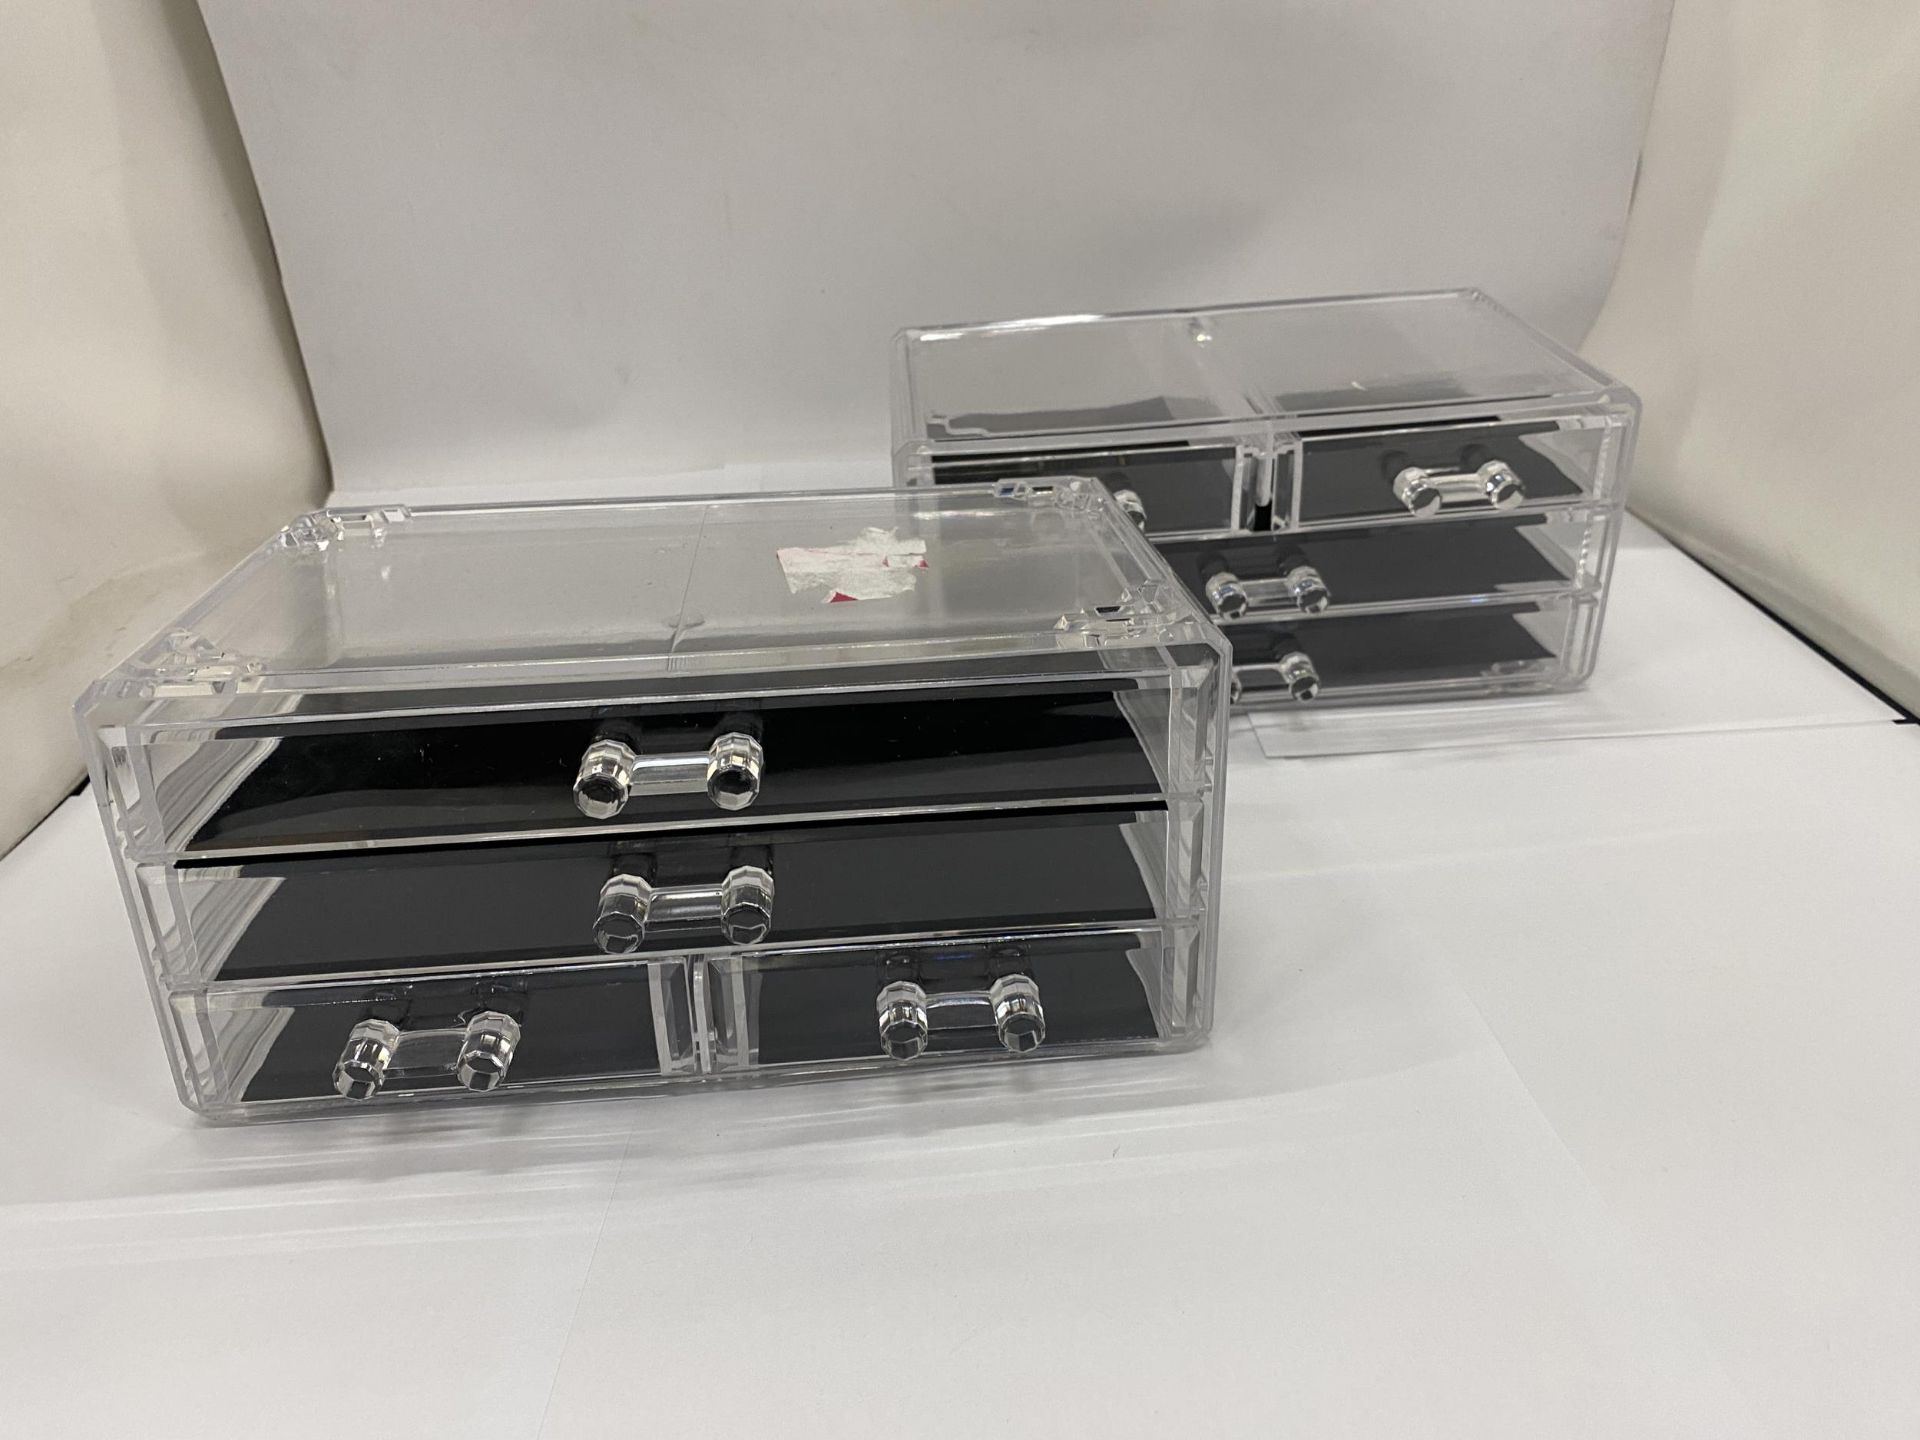 TWO SETS OF PLASTIC DRAWERS